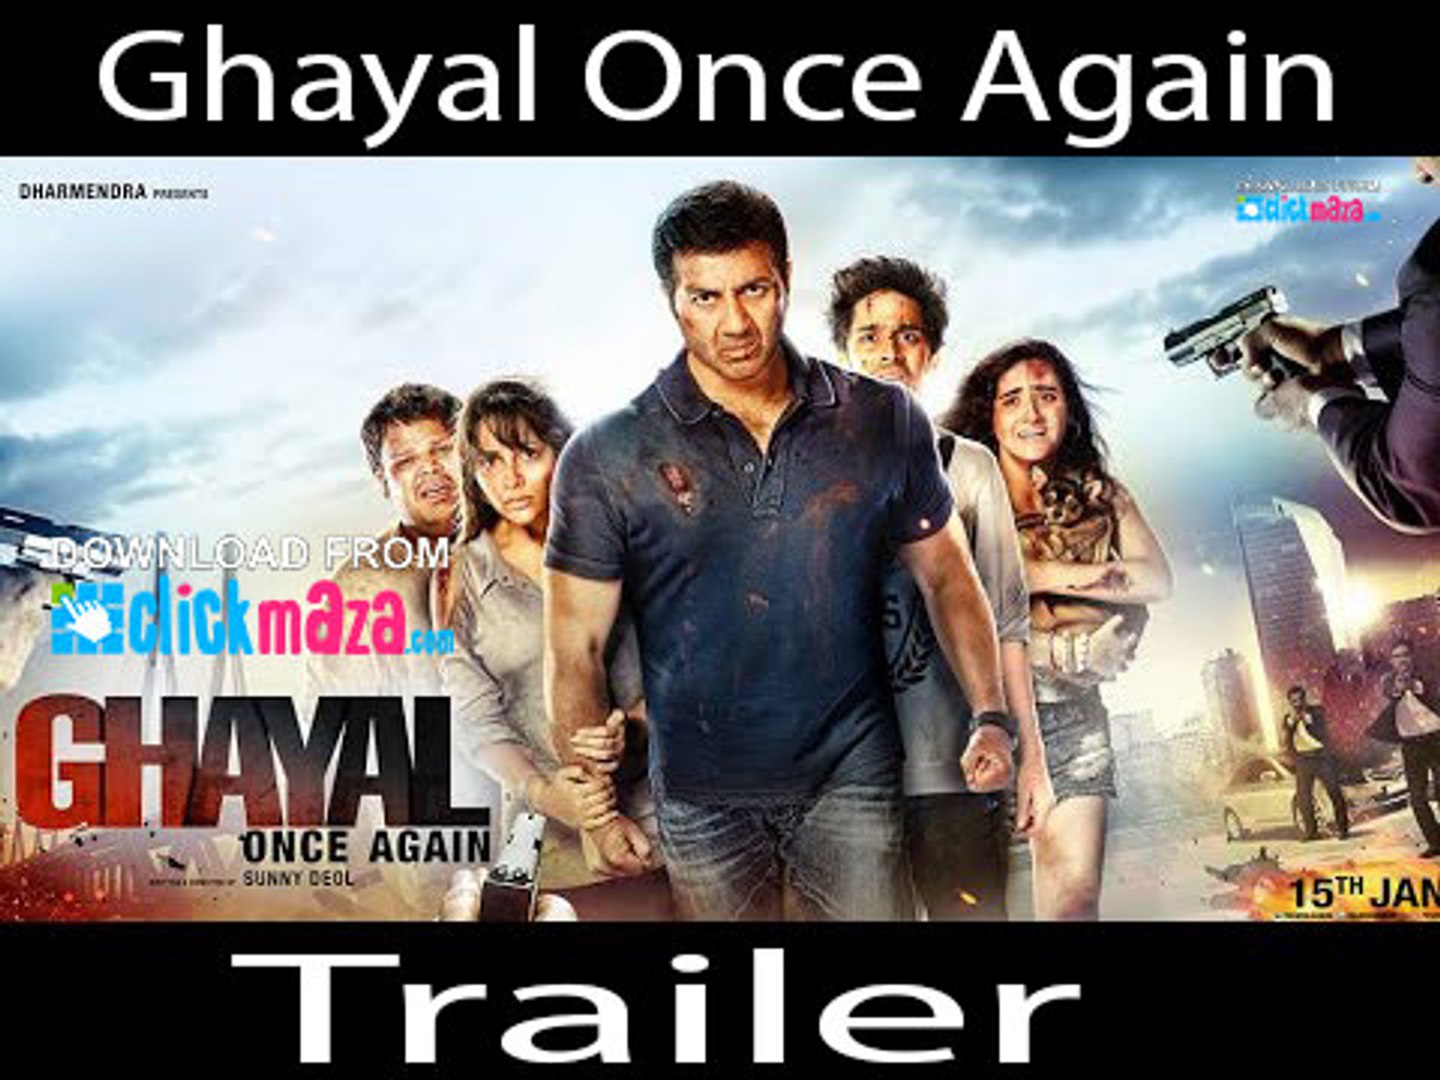 Sunny Deol Bf Hd Video - Ghayal Once Again Movie In Hindi Download 720p Hd Muthuchippi ...